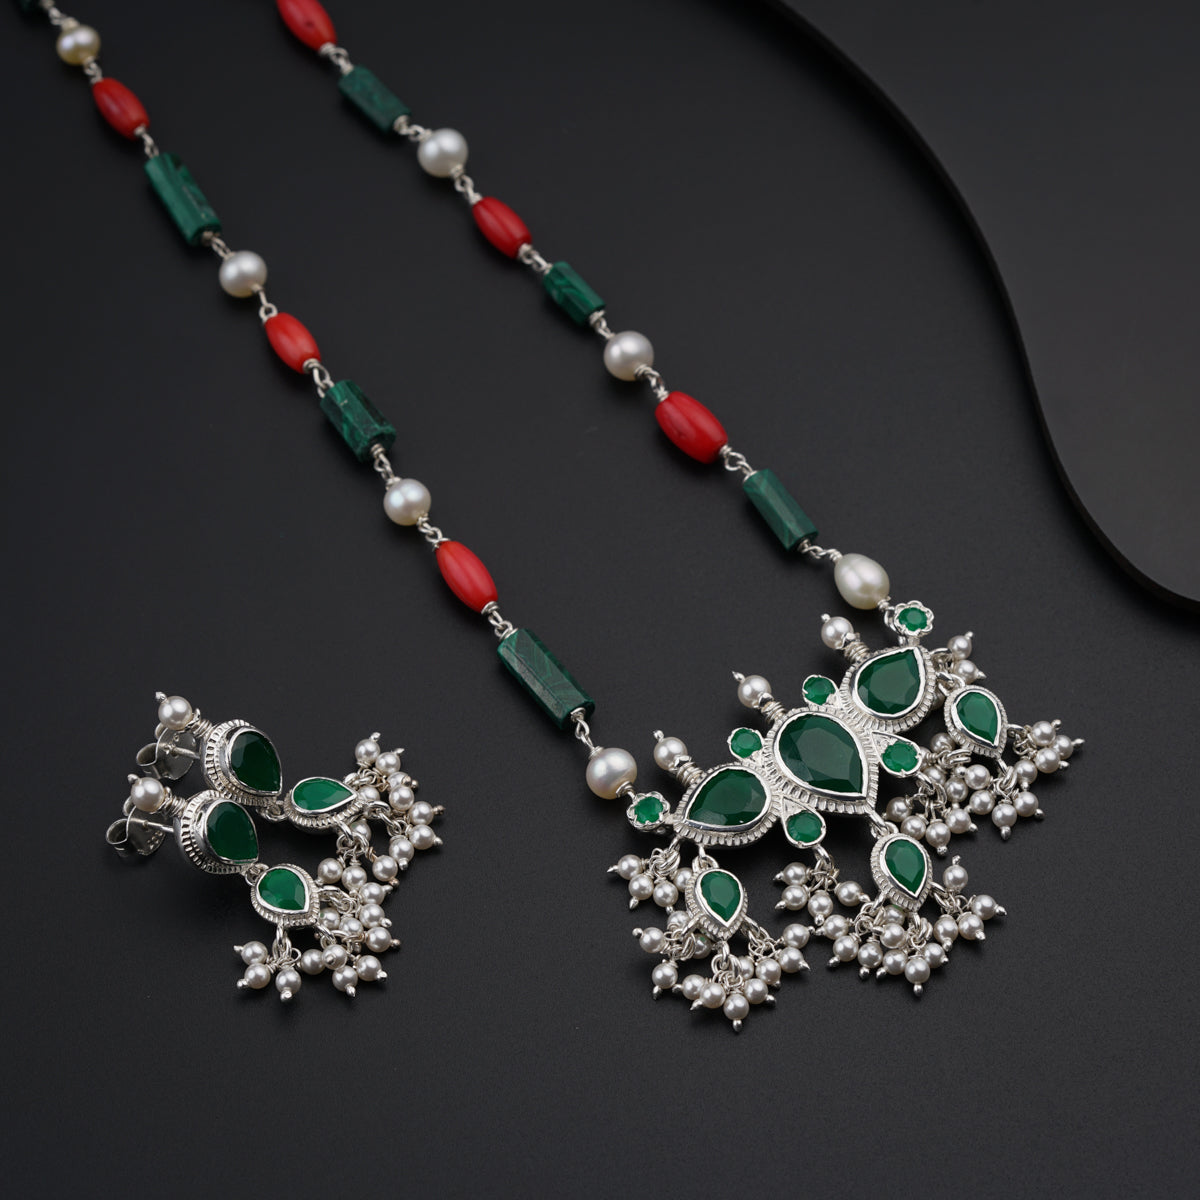 a long necklace with green and red beads